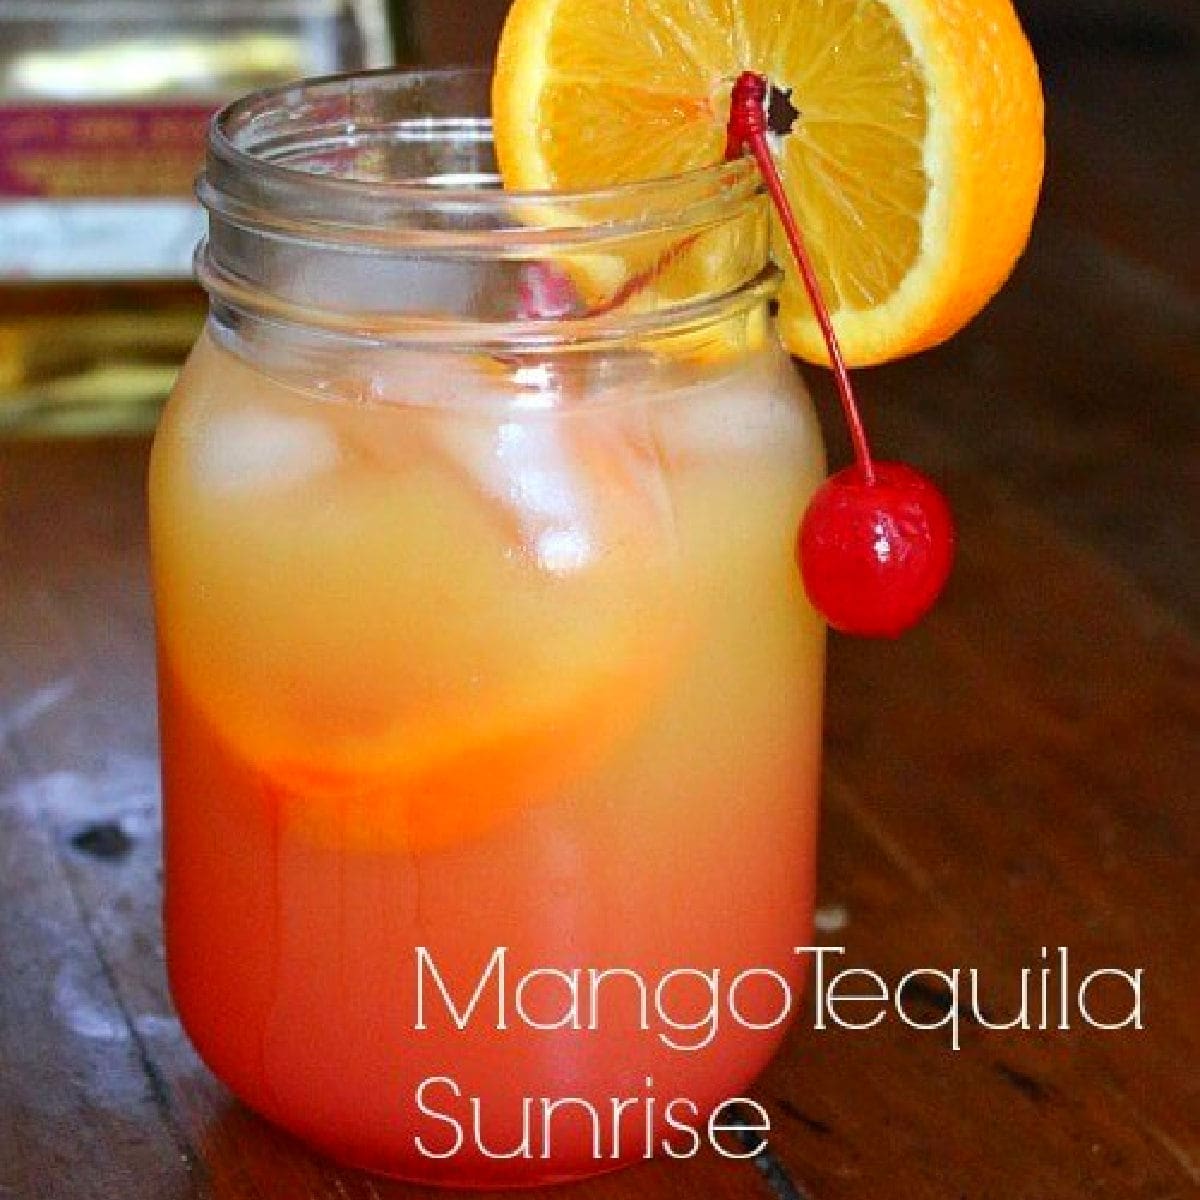 Closeup of a mango tequila sunrise garnished with an orange and a cherry.